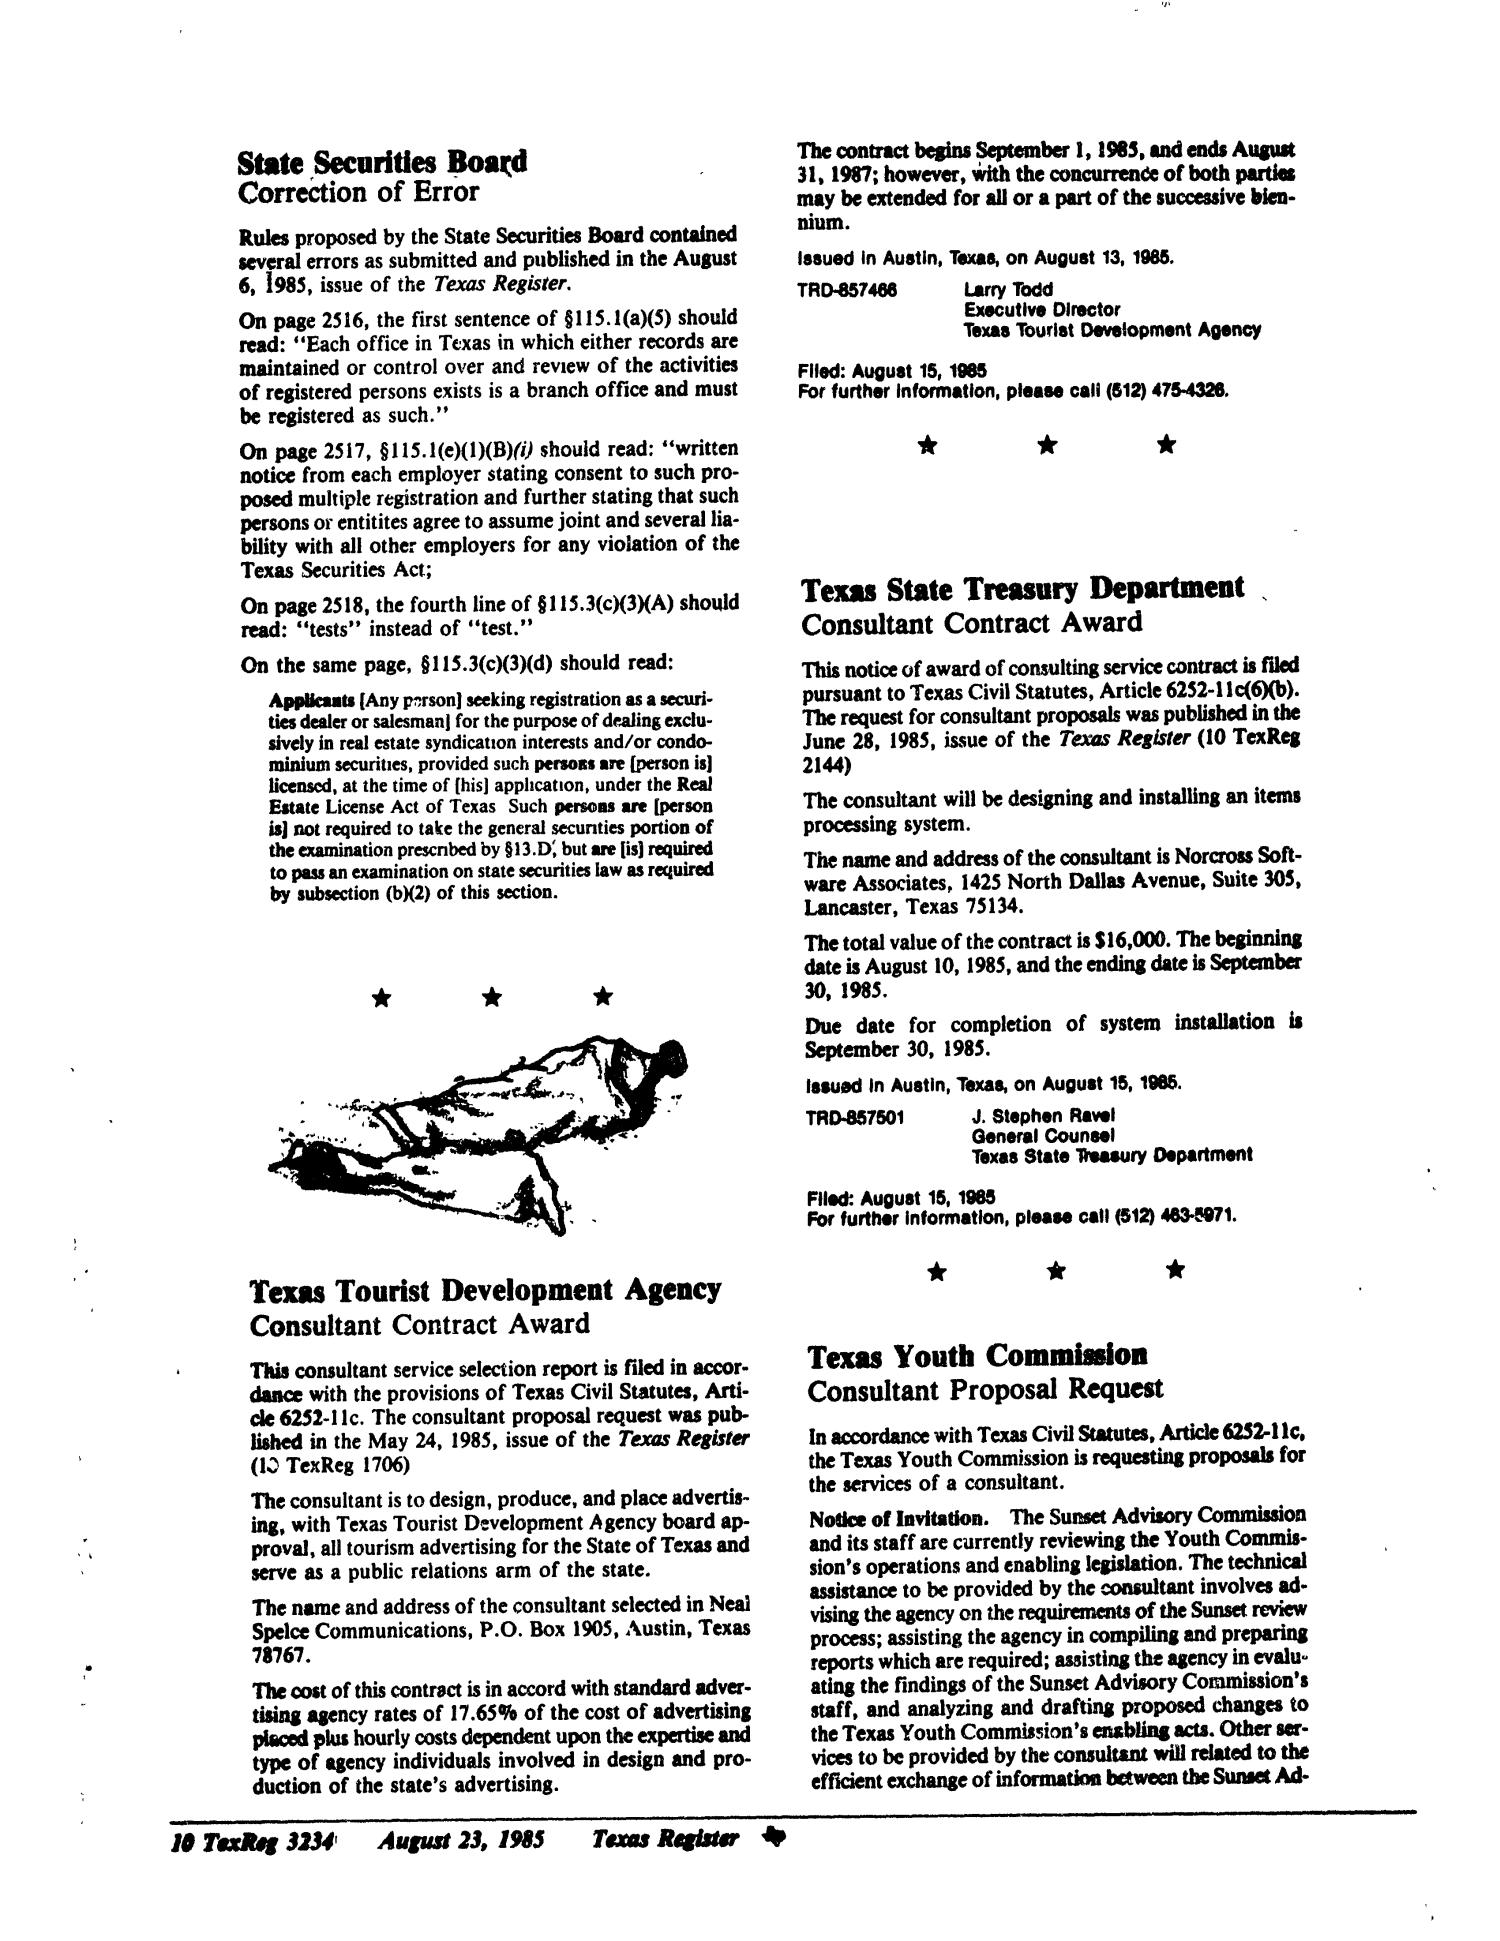 Texas Register, Volume 10, 63, Pages 3197-3236, August 23, 1985
                                                
                                                    3234
                                                